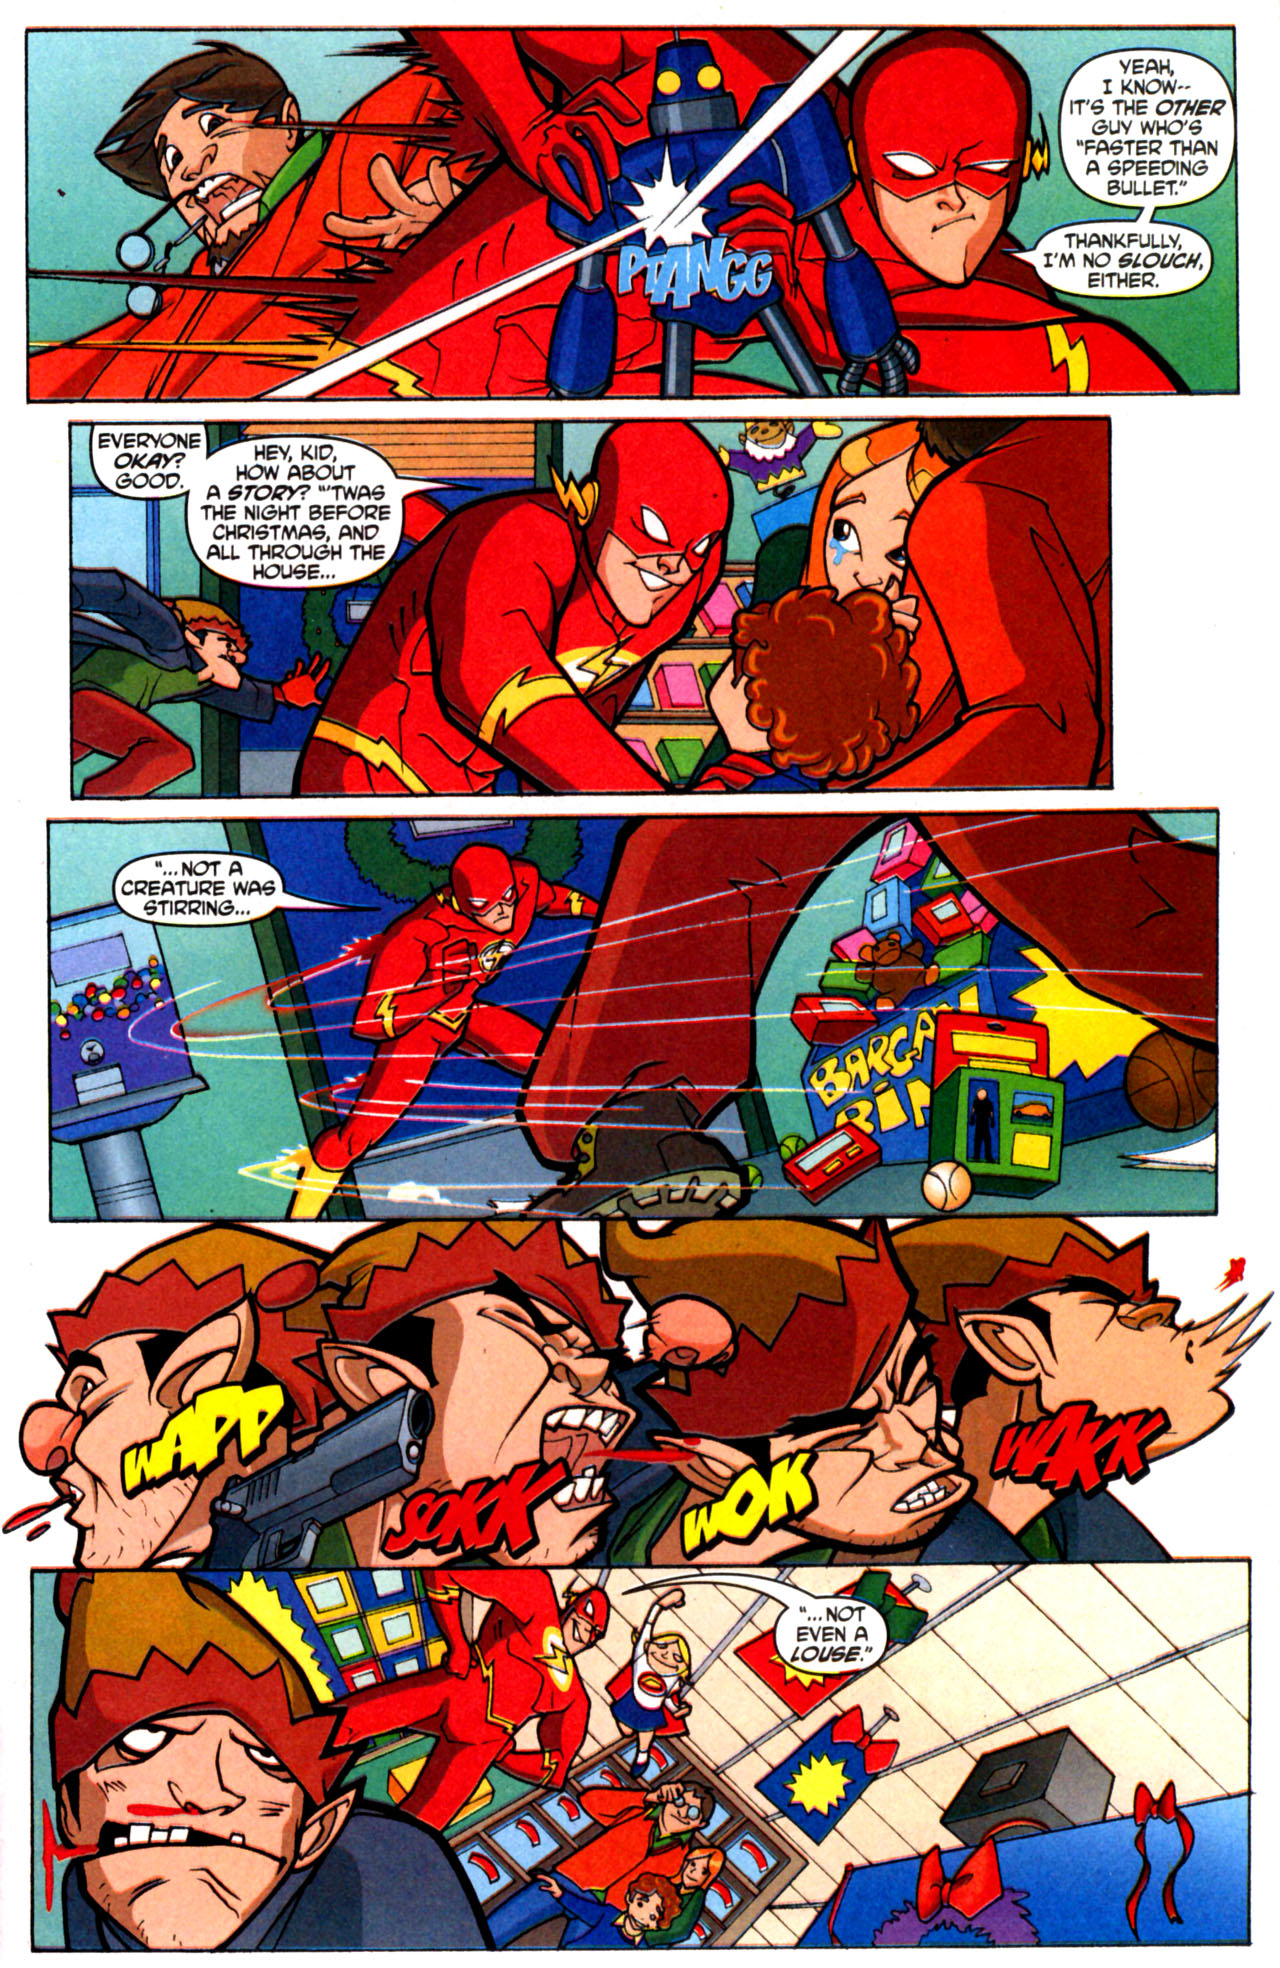 Read online Justice League Unlimited comic -  Issue #28 - 18